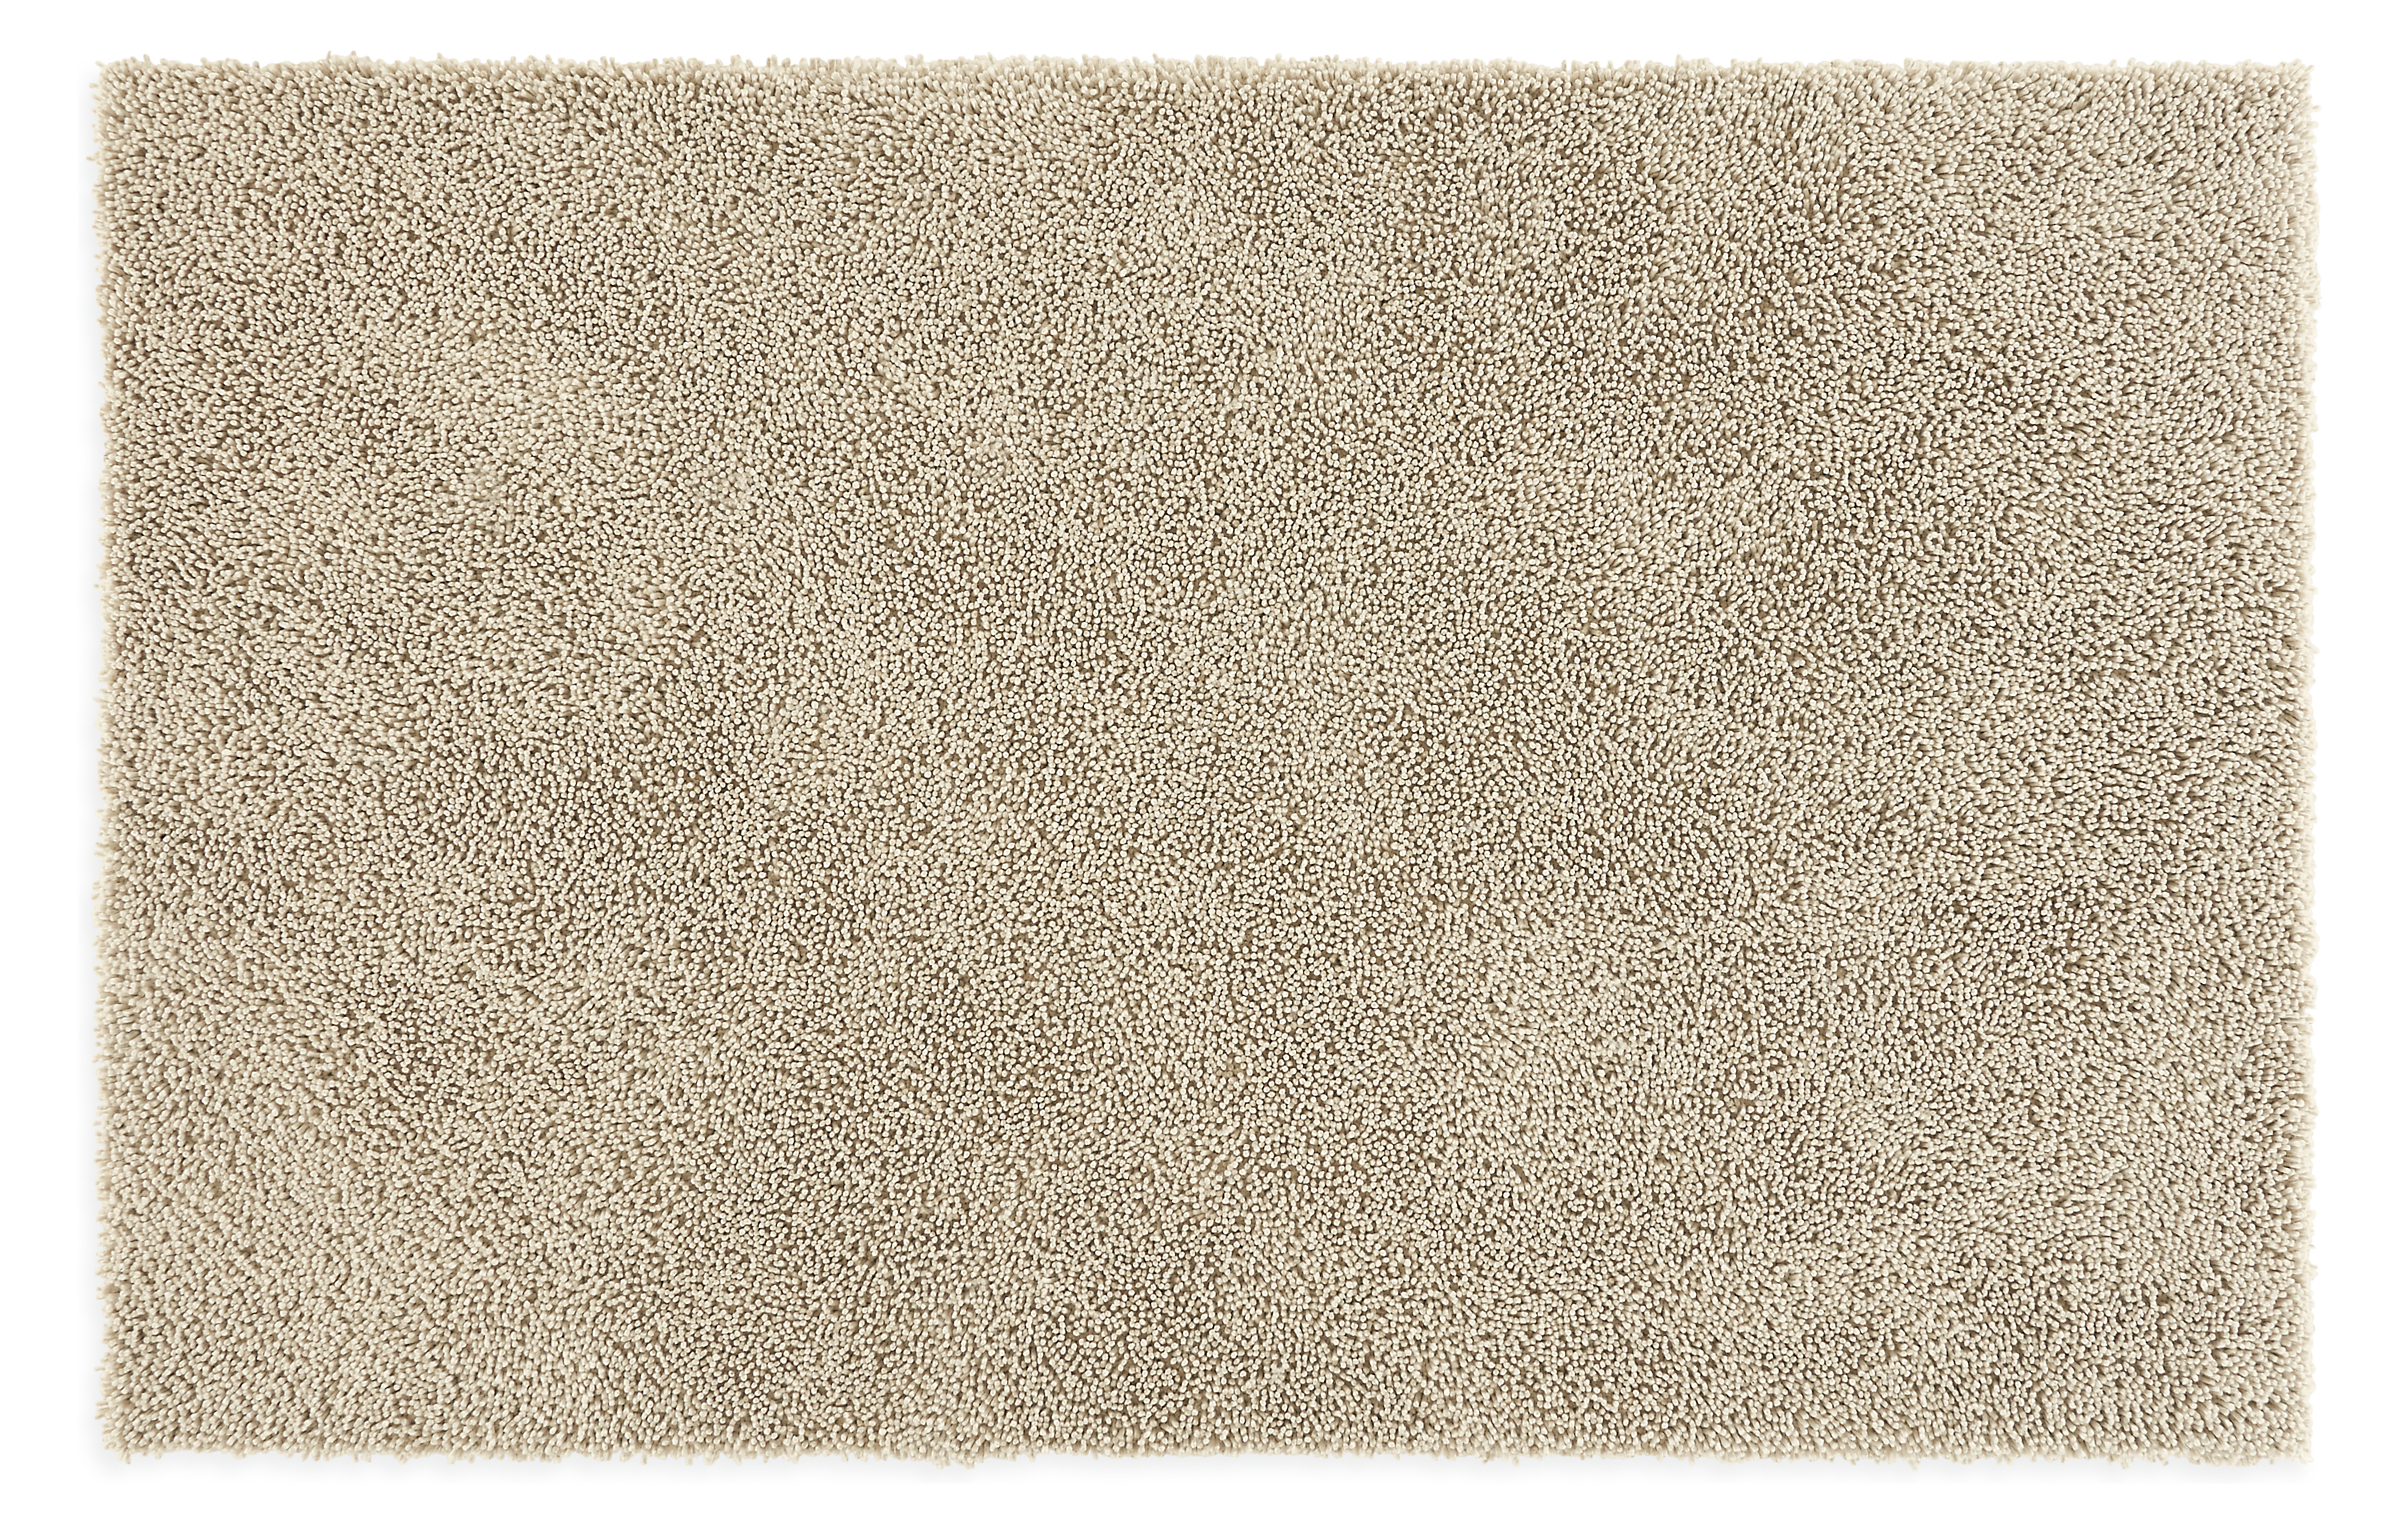 Arden High Shag 9' Square Rug in Oatmeal